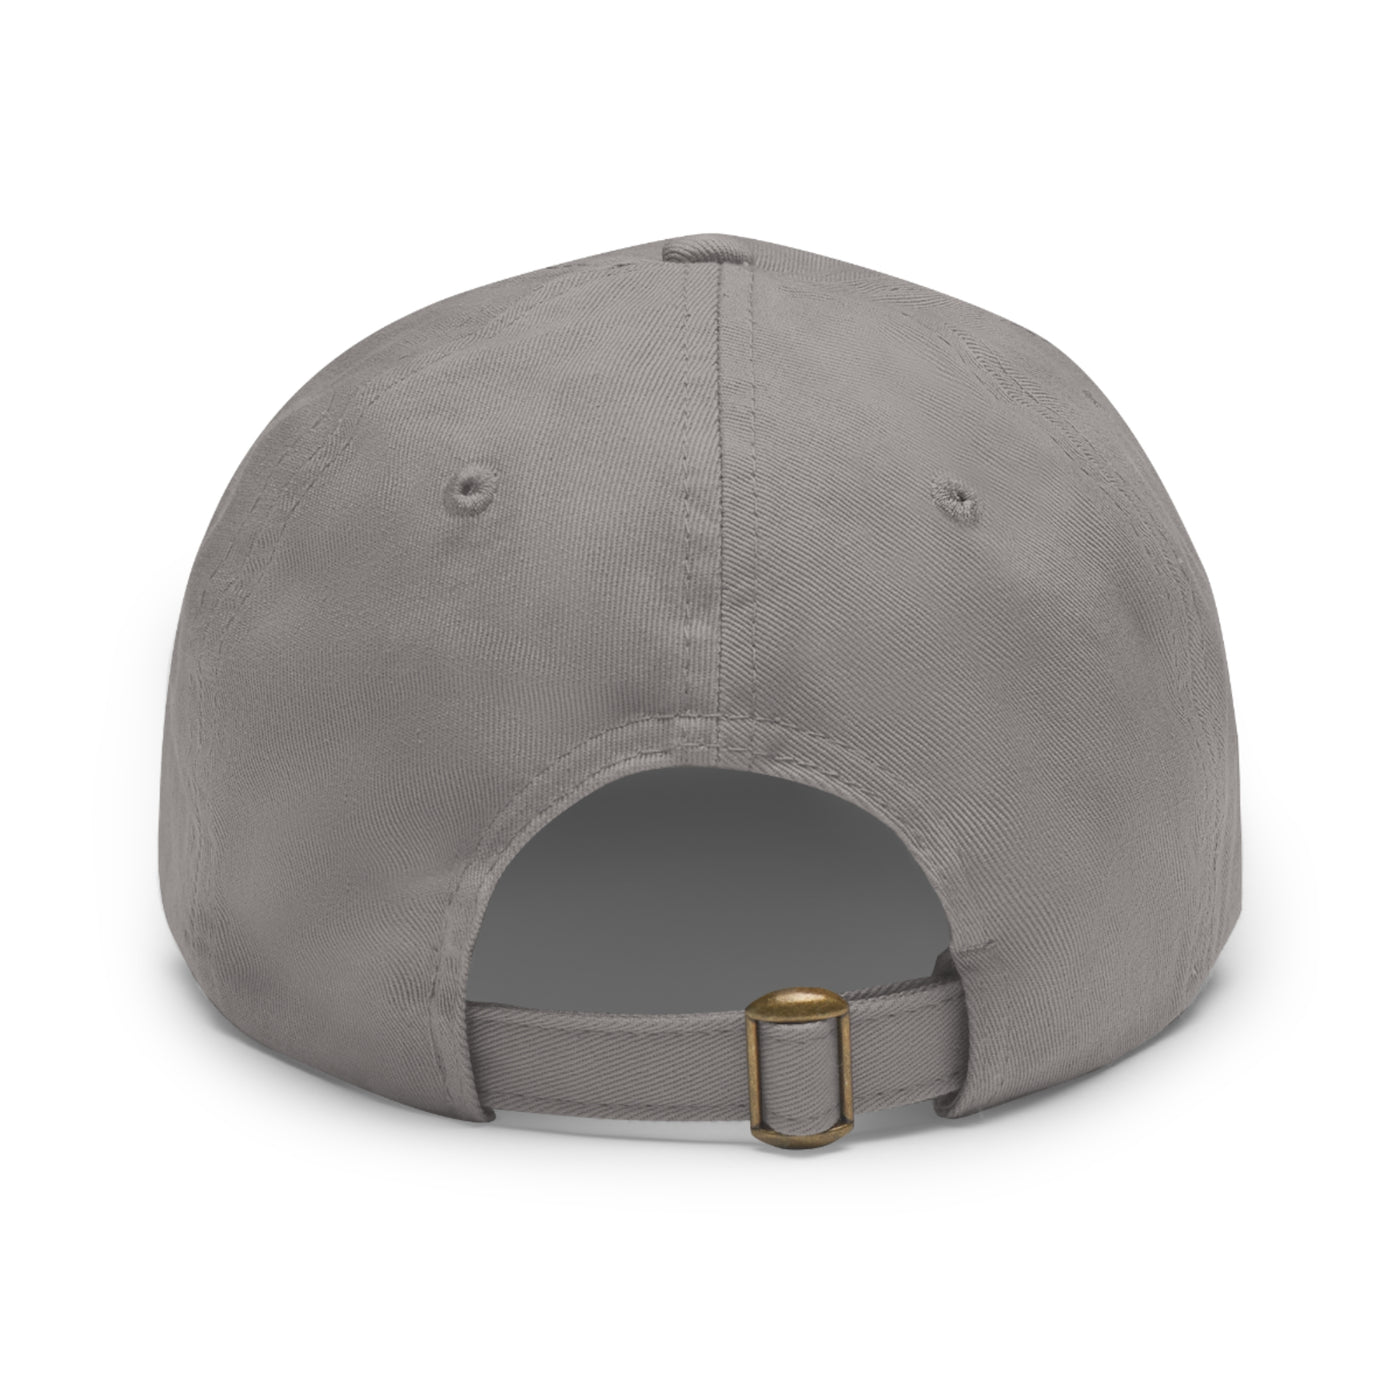 Camping is my favorite season Hat with Leather Patch (Round)